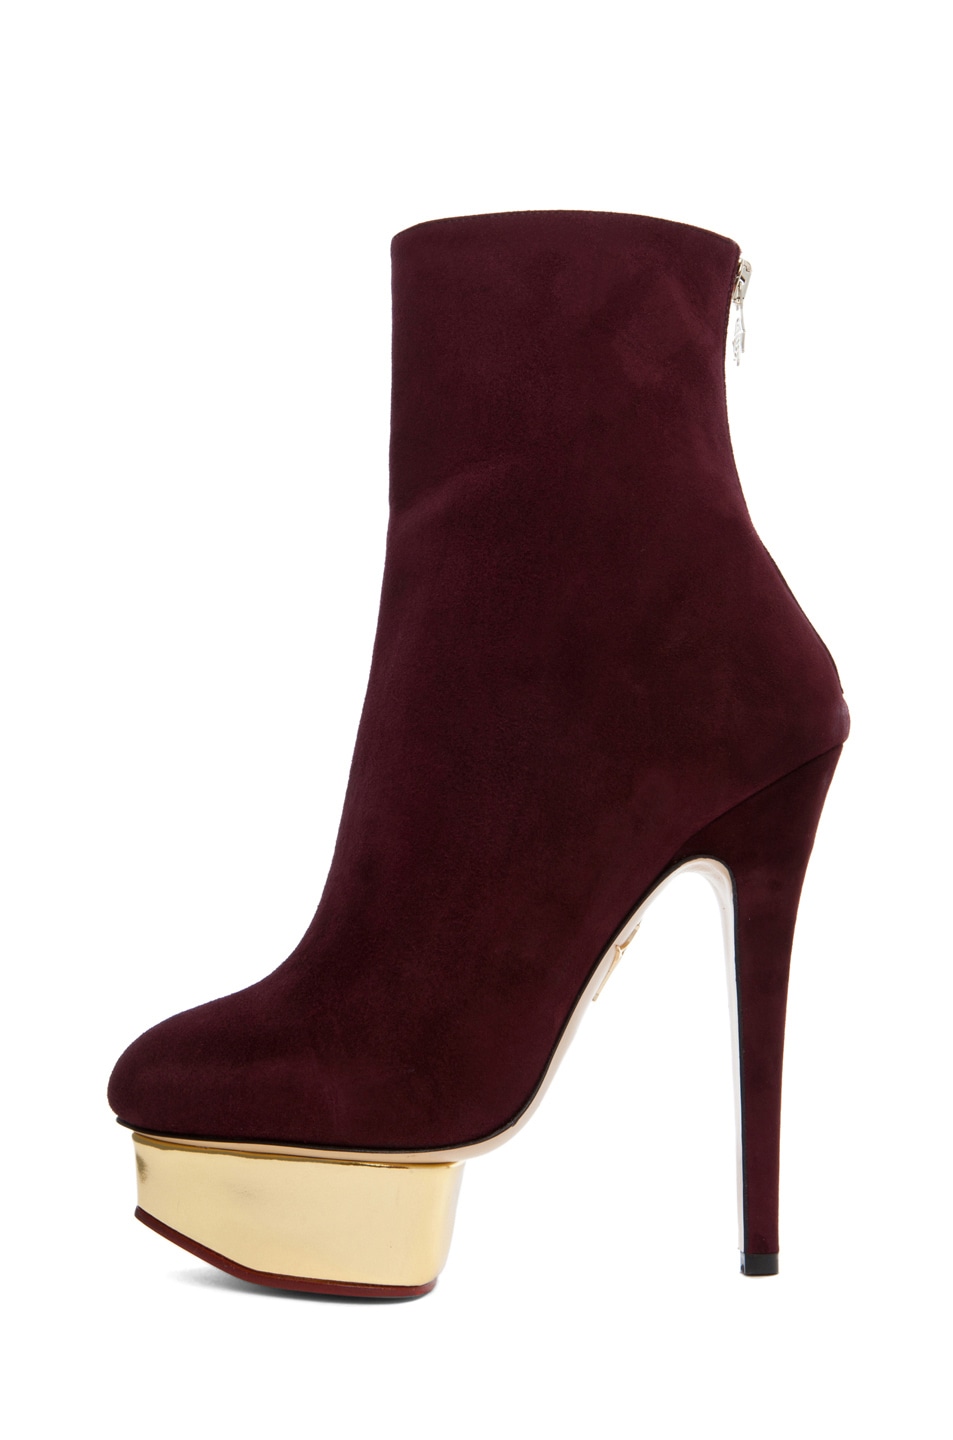 Image 1 of Charlotte Olympia Lucinda Ankle Boot in Aubergine